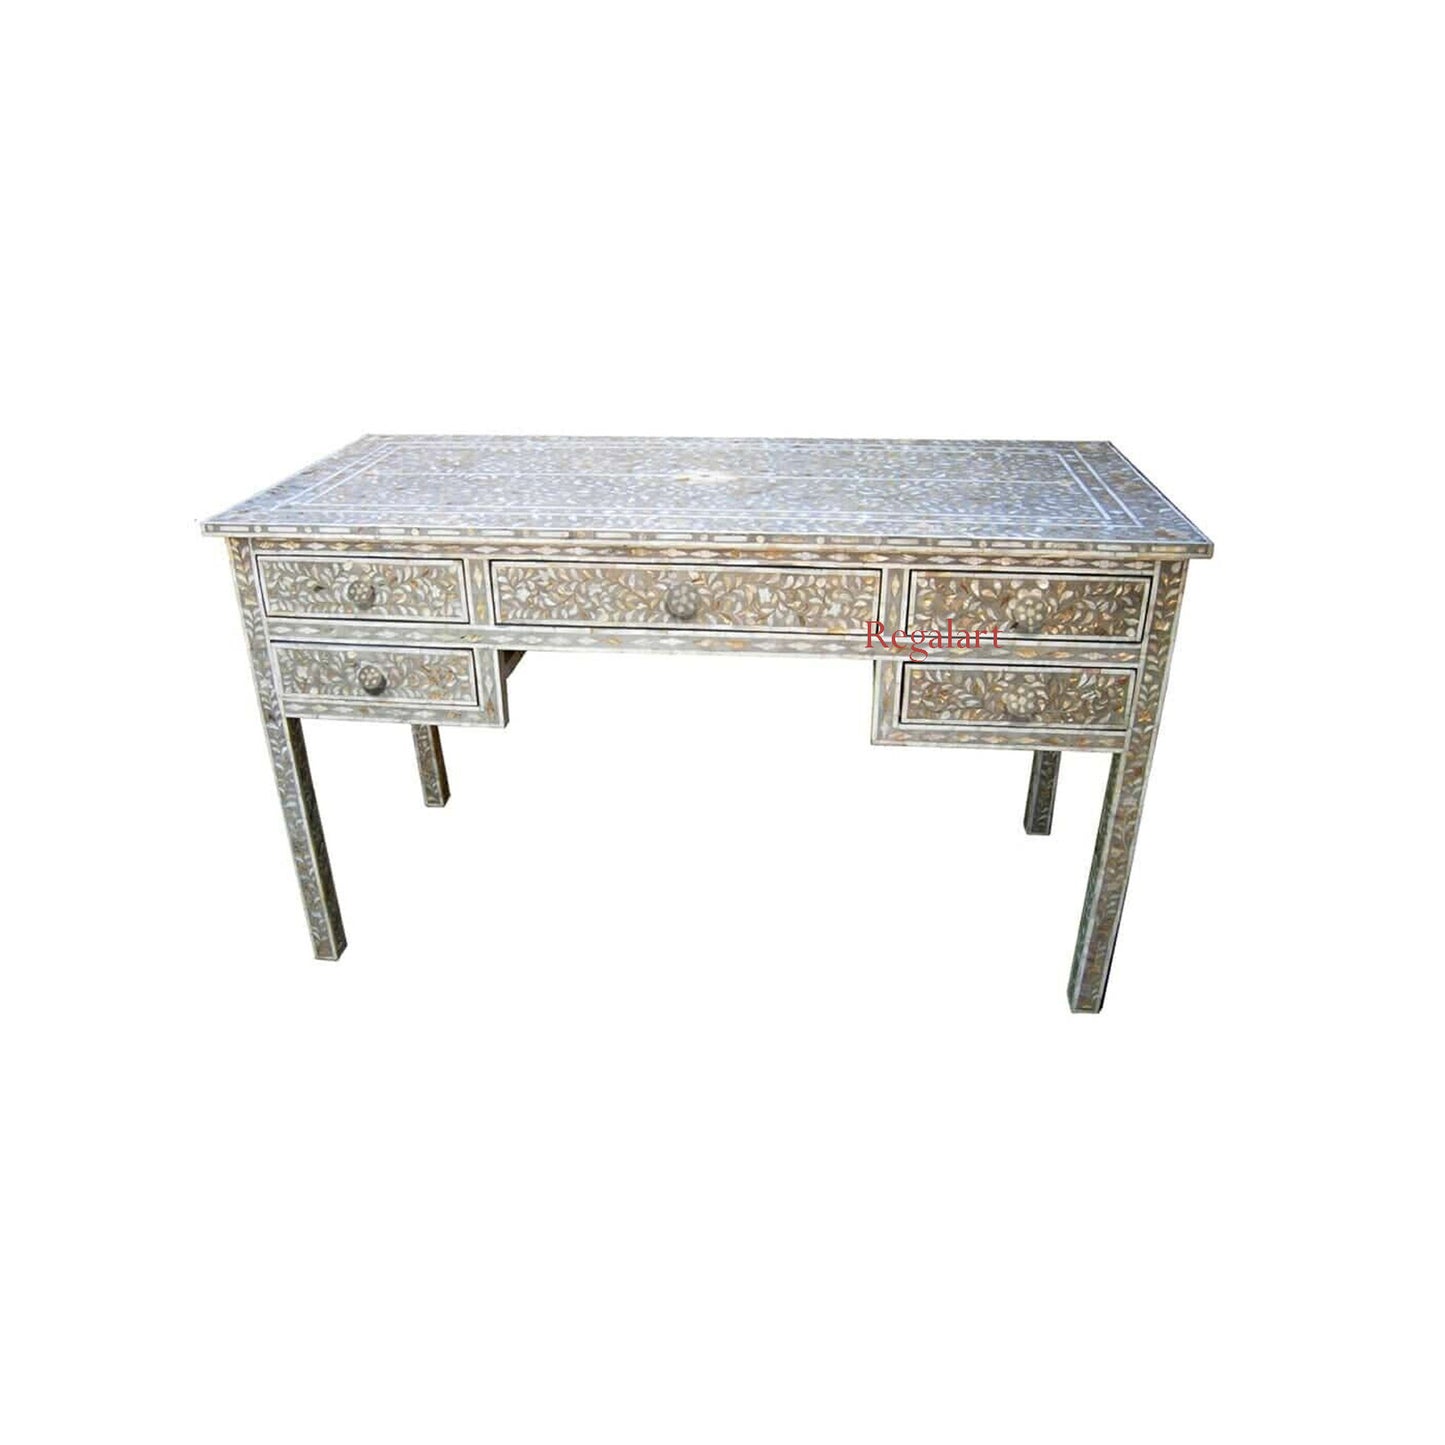 Mother of pearl Work desk Laptop Table Study Table Handmade Floral Pattern Bedroom Drawer Table